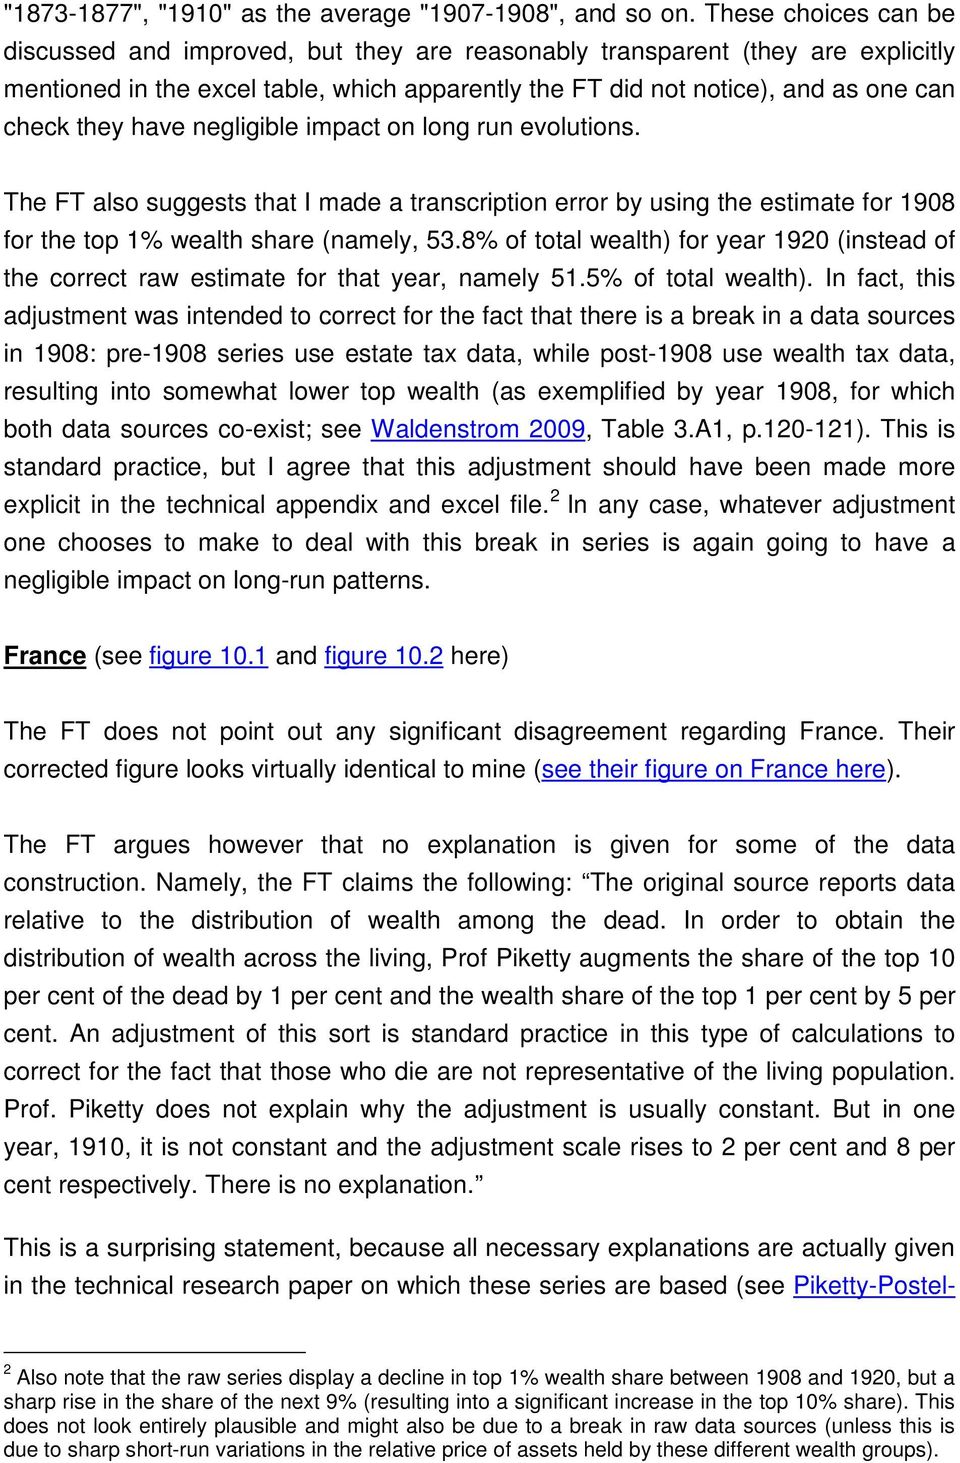 have negligible impact on long run evolutions. The FT also suggests that I made a transcription error by using the estimate for 1908 for the top 1% wealth share (namely, 53.